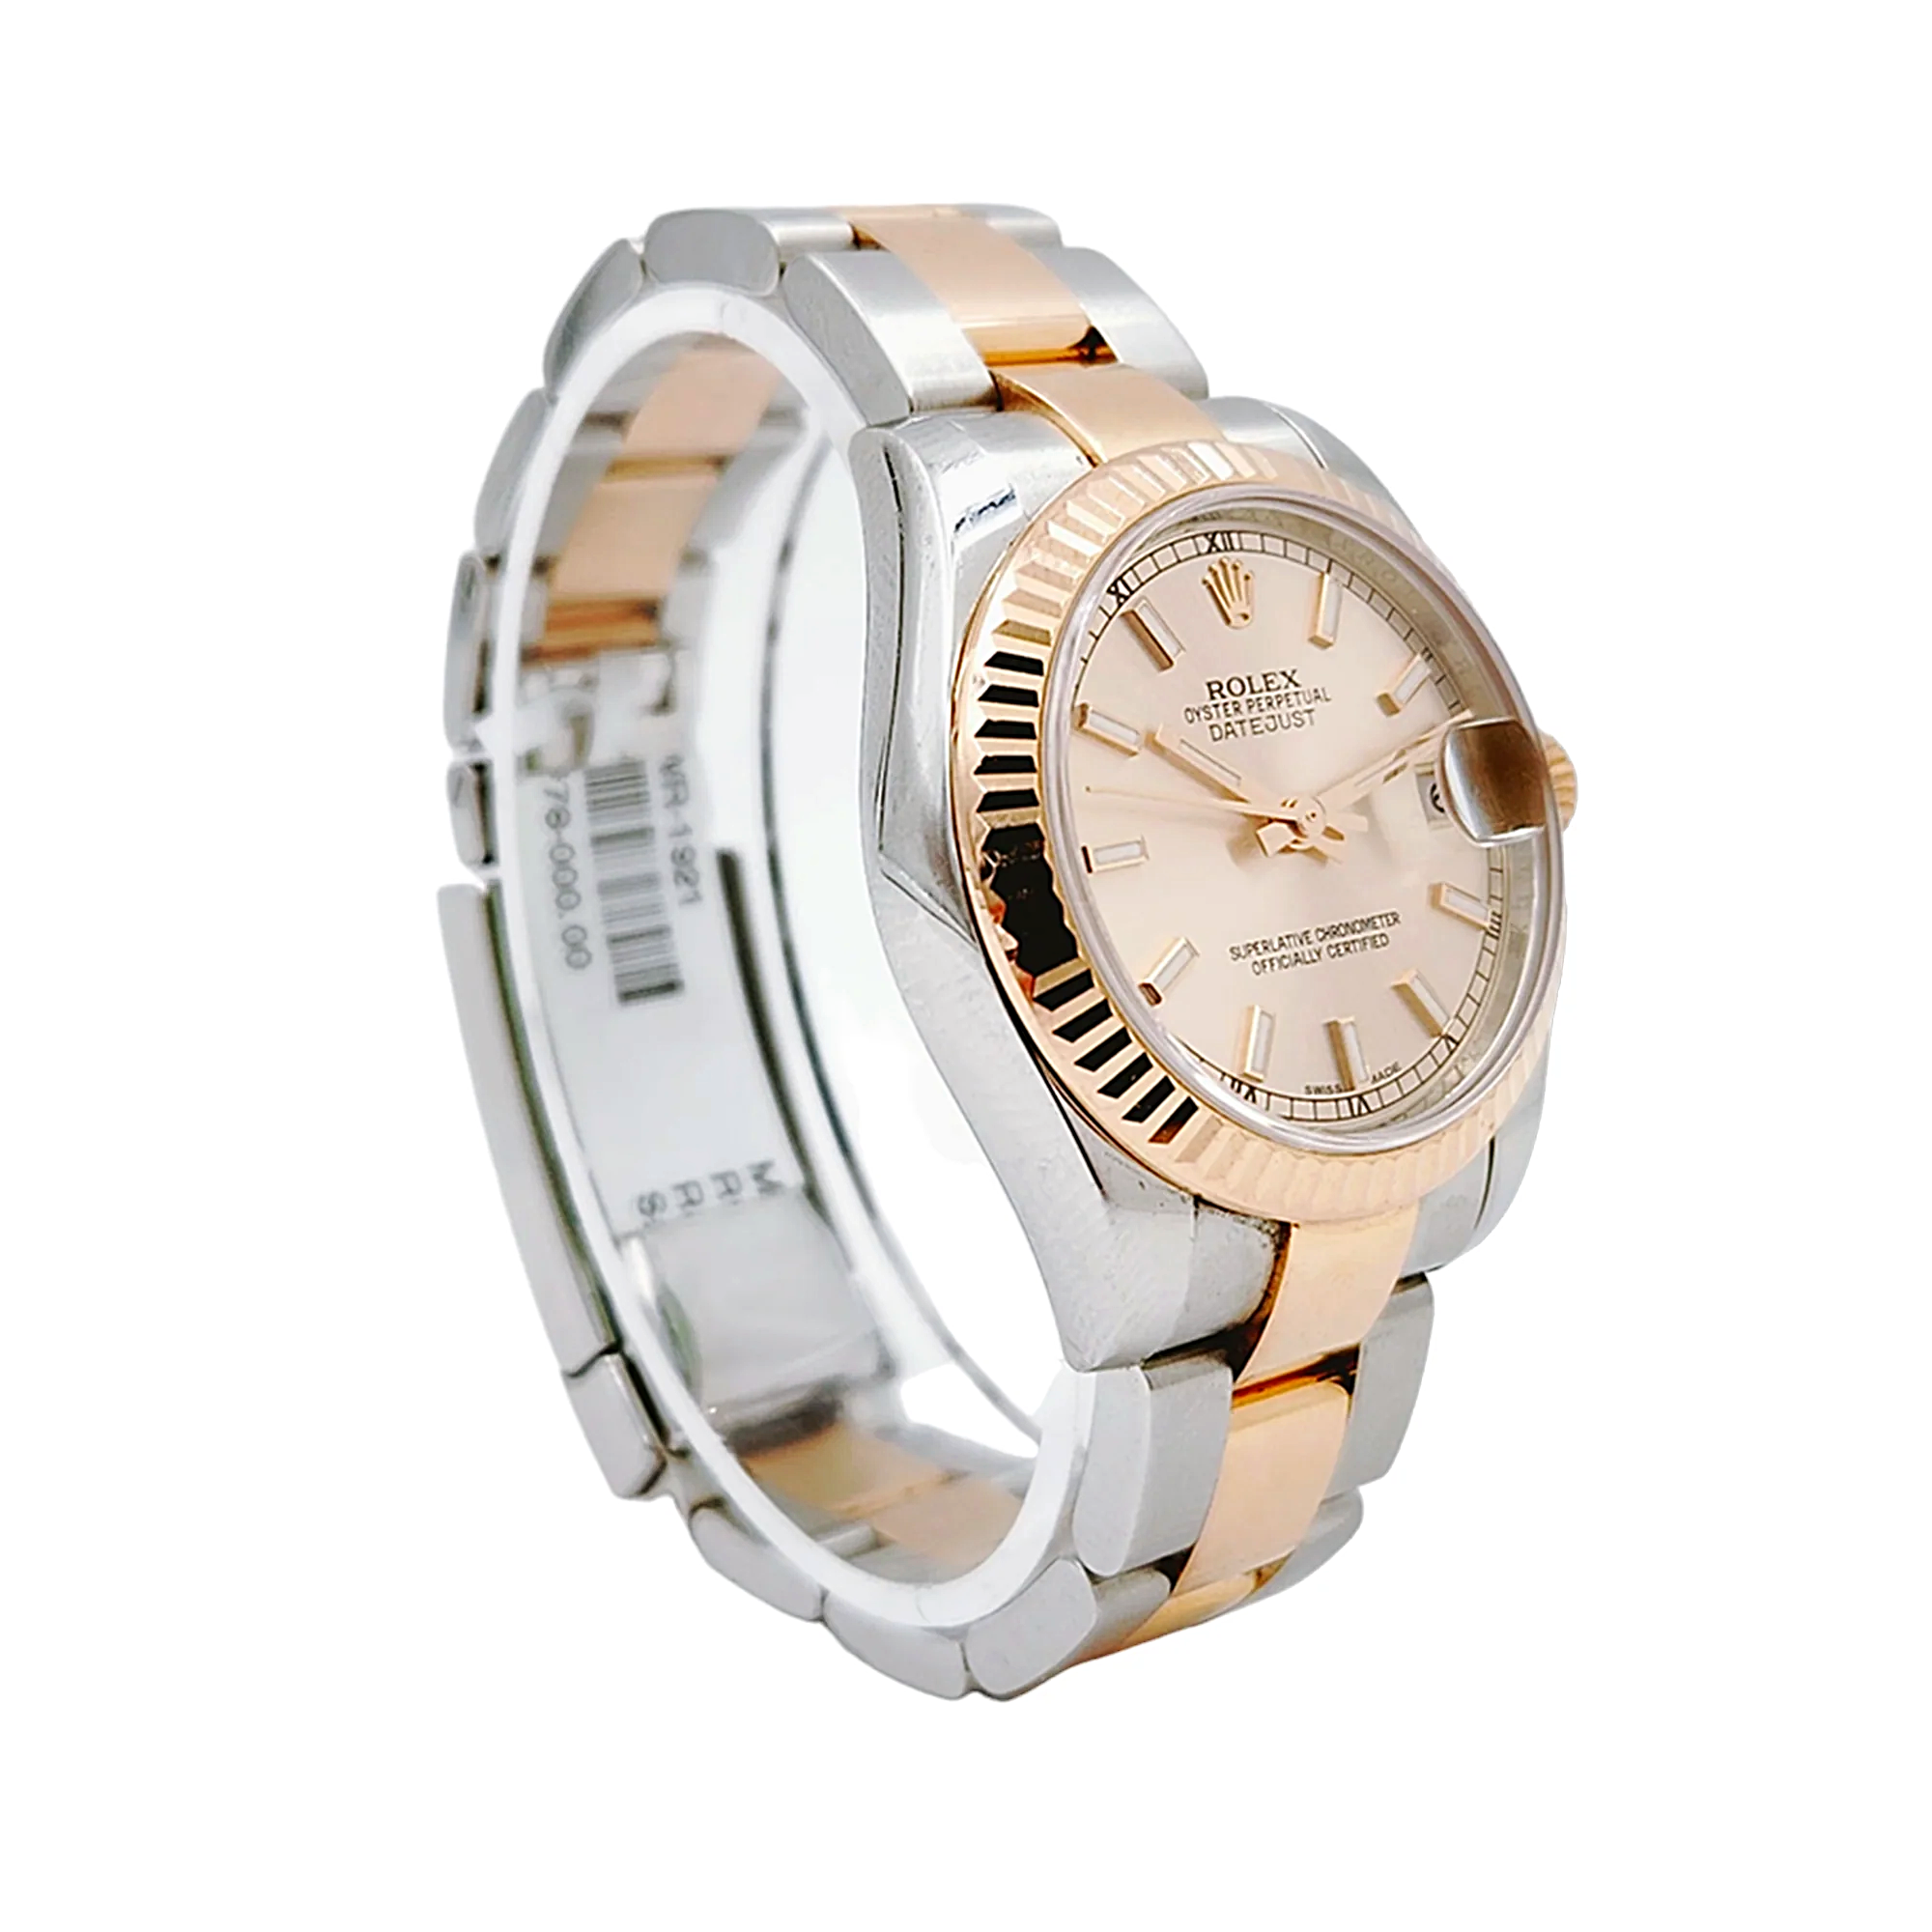 Ladies Rolex 31mm Midsize DateJust Two Tone 18K Rose Gold / Stainless Steel Watch with Pink Dial and Fluted Bezel. (Pre-Owned 178271)